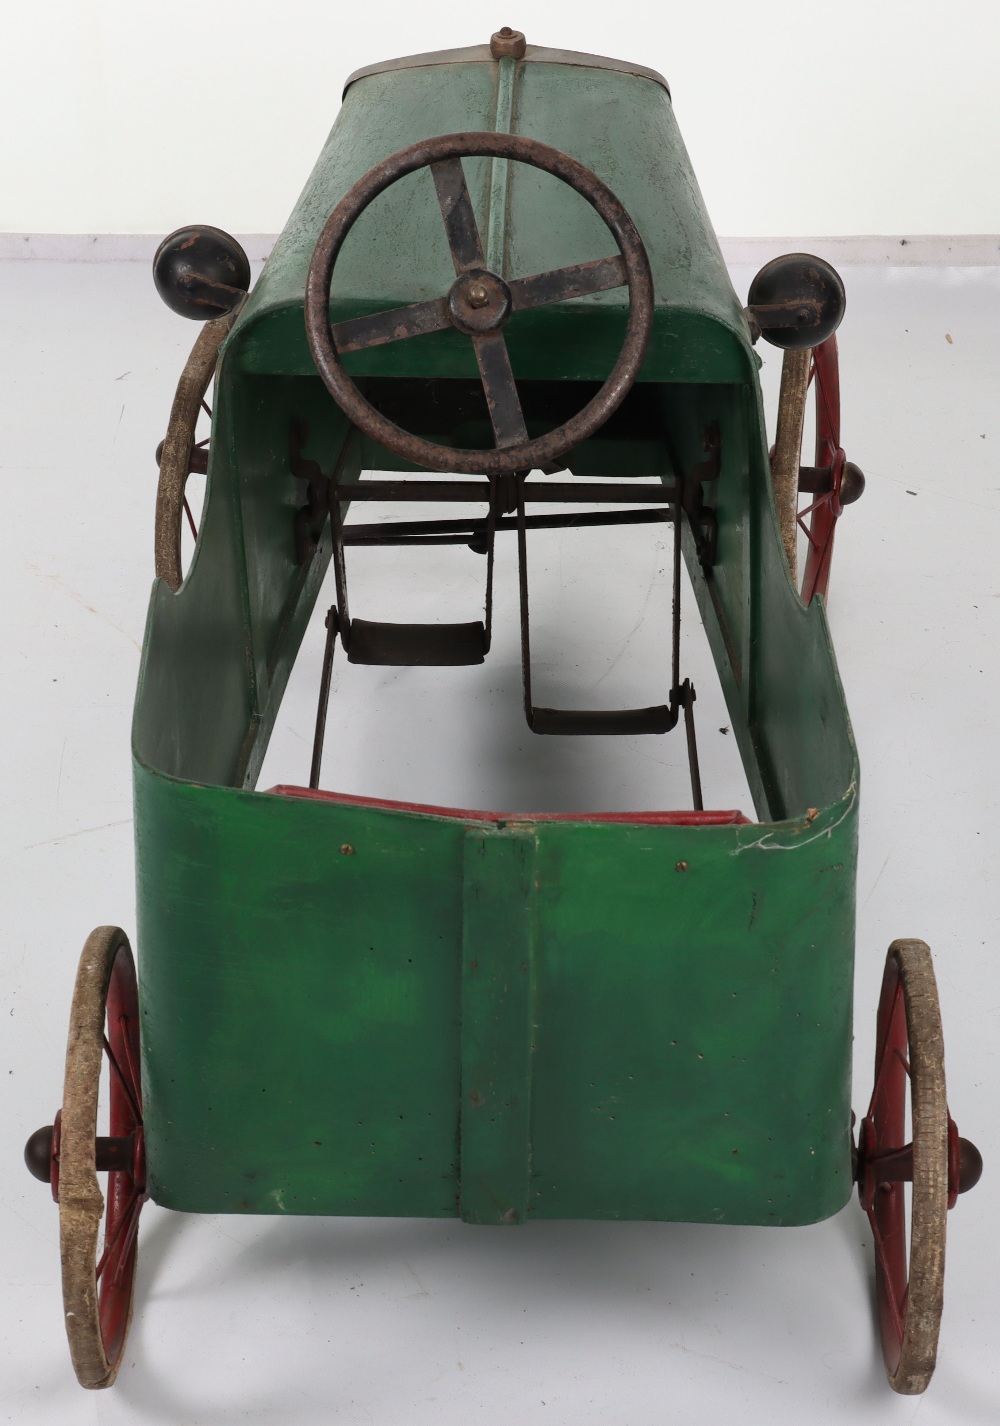 A Lines Bro Ltd wooden child’s pedal car, English 1920s - Image 7 of 8